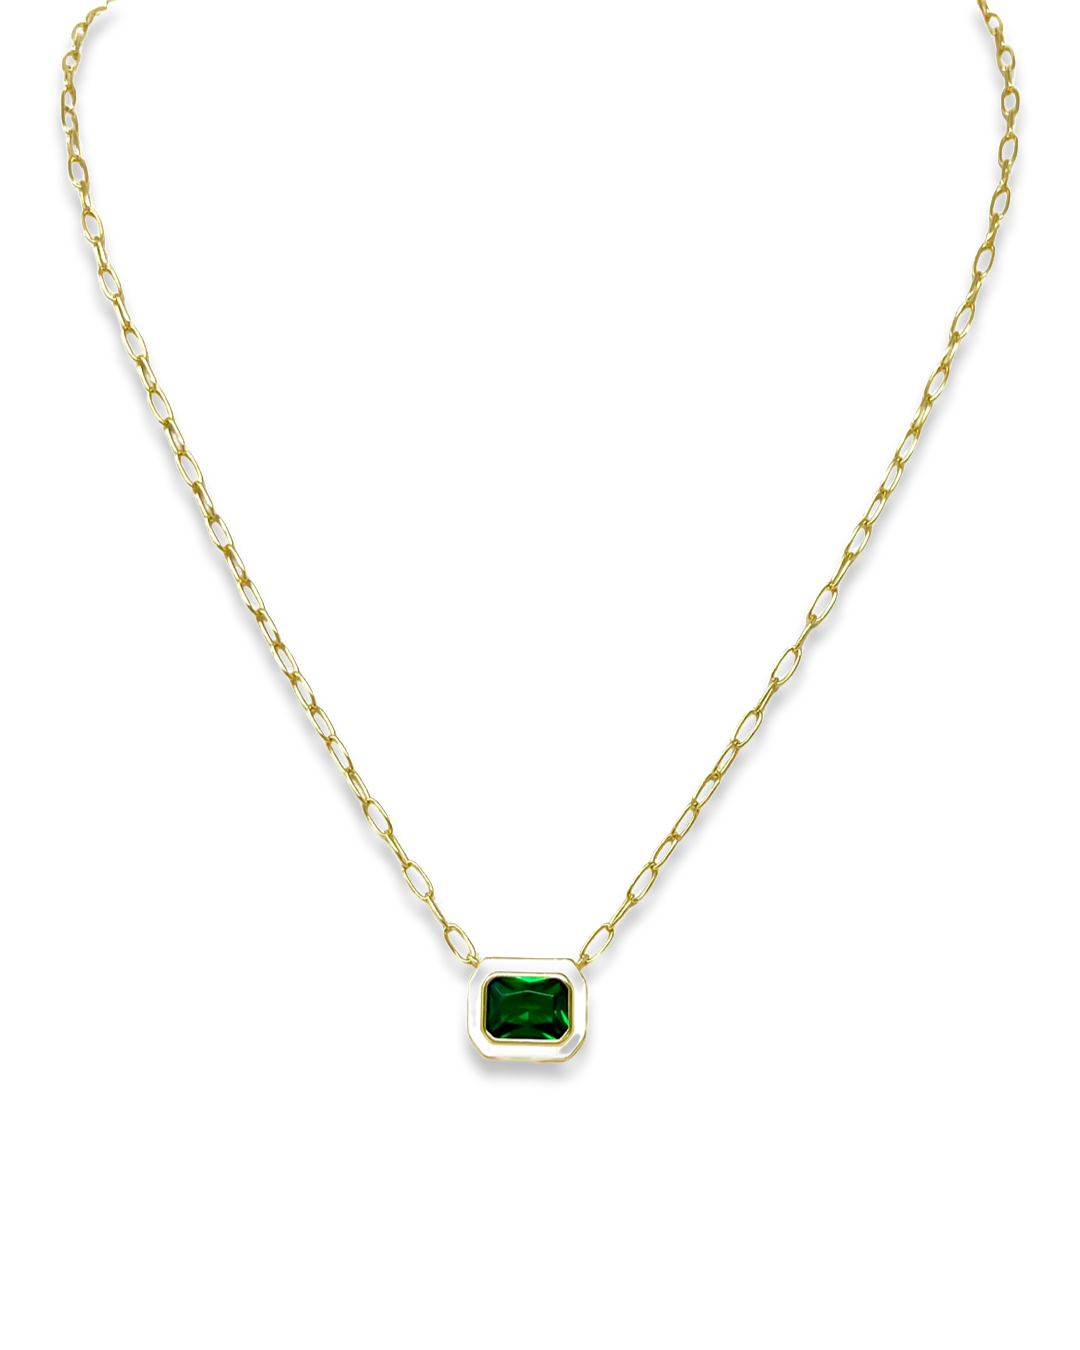 Gatsby Necklace in Emerald Green